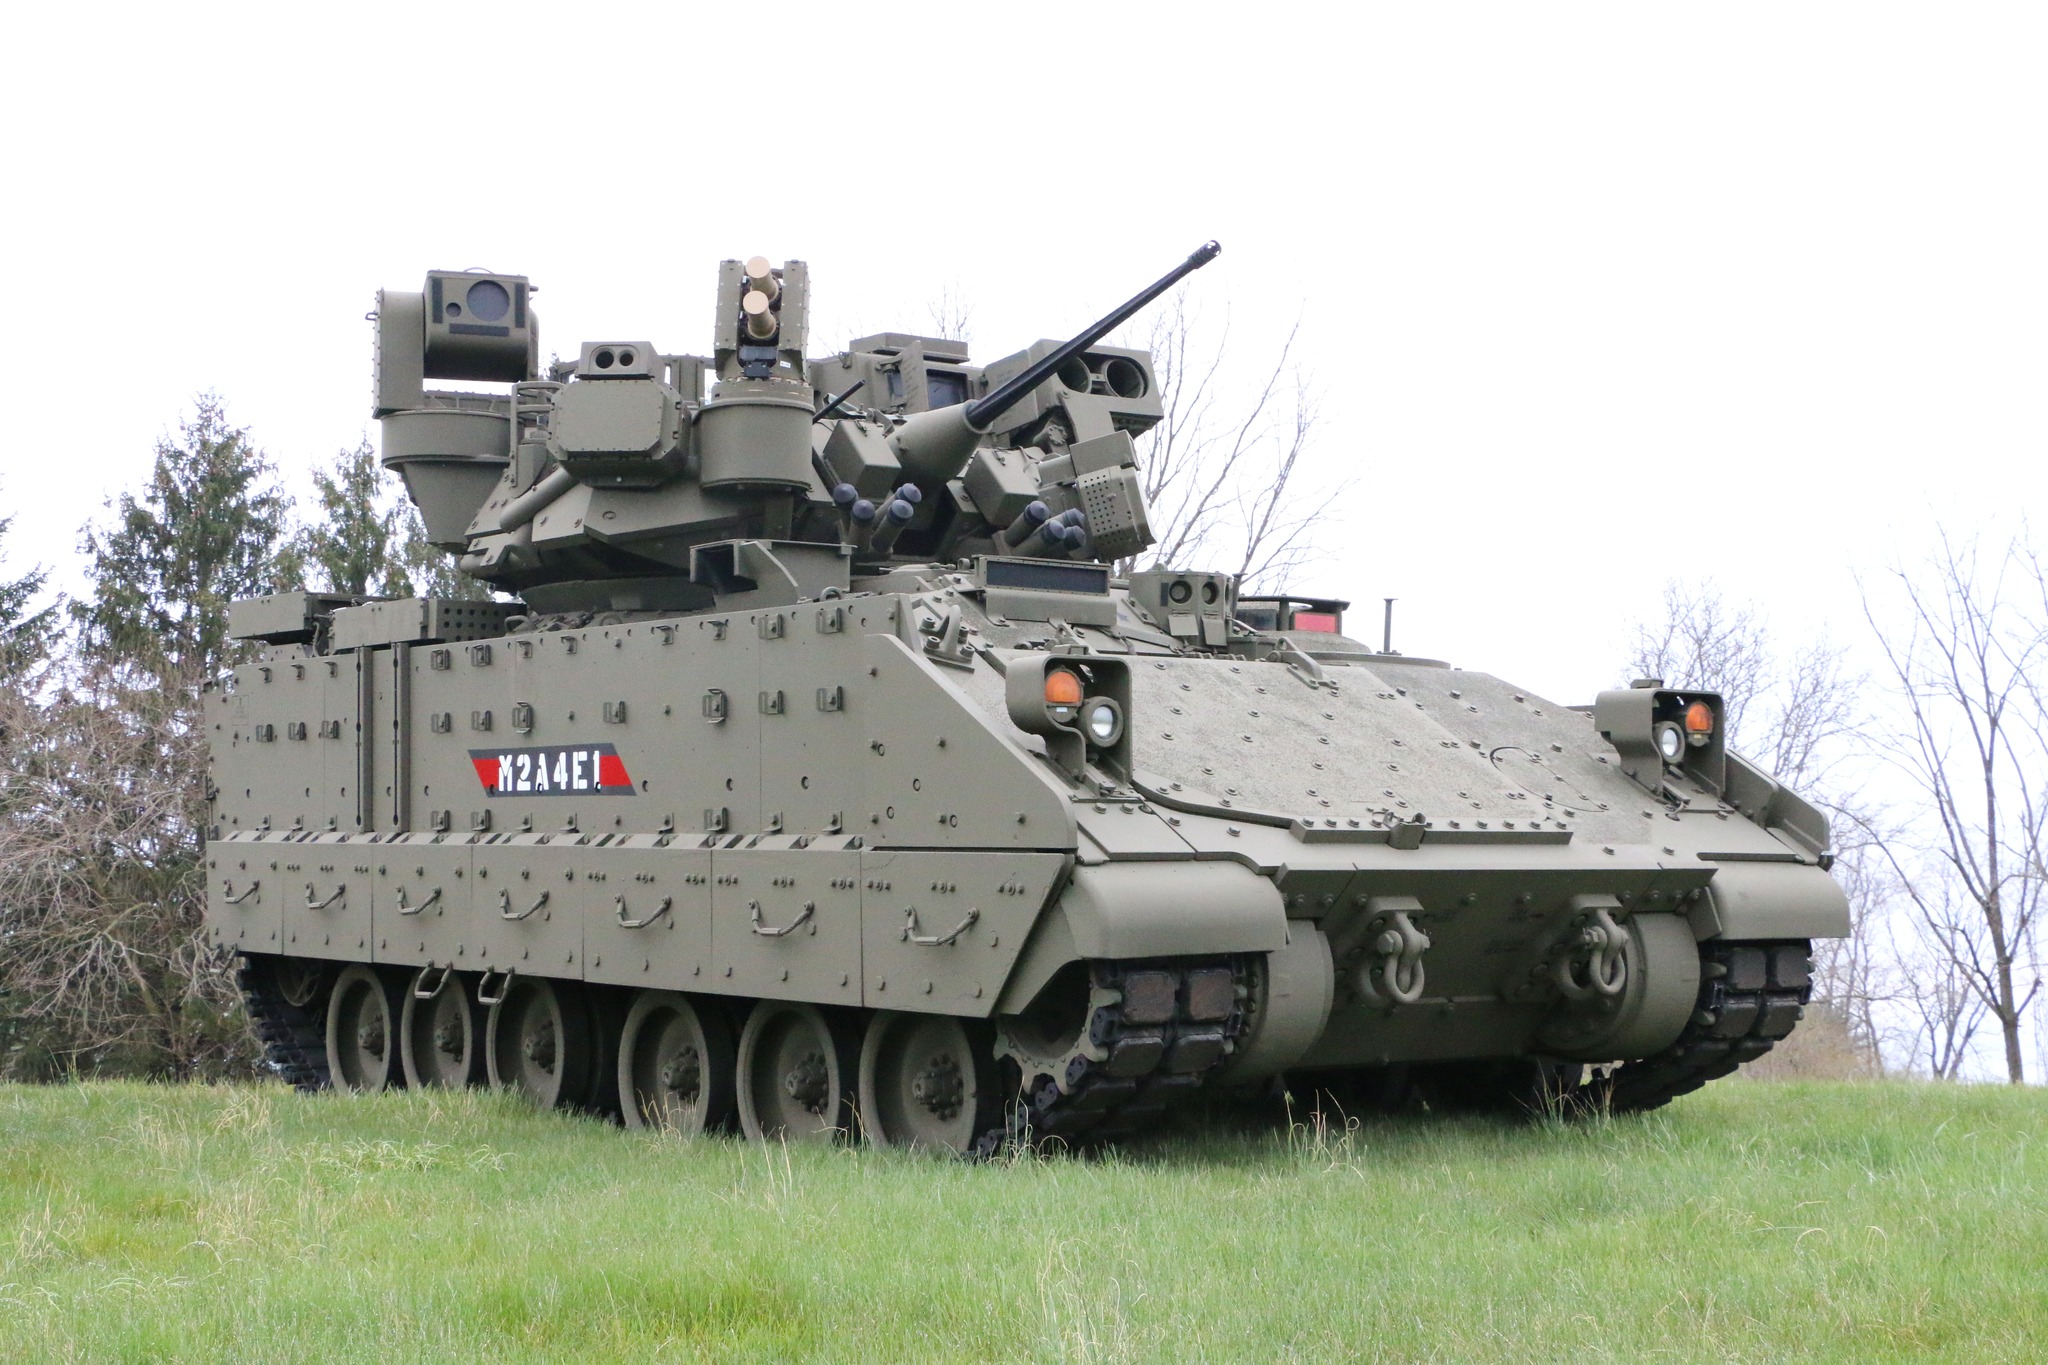 A Bradley M2A4E1 Fighting Vehicle is seen stationed at a grassy area with thin trees in the back. The vehicle is a tracked armored unit that is painted grayish green. Its turret points northeast, and its body is facing to the right side of the image. Its model name is painted in white on its right side, with a gray and red background.